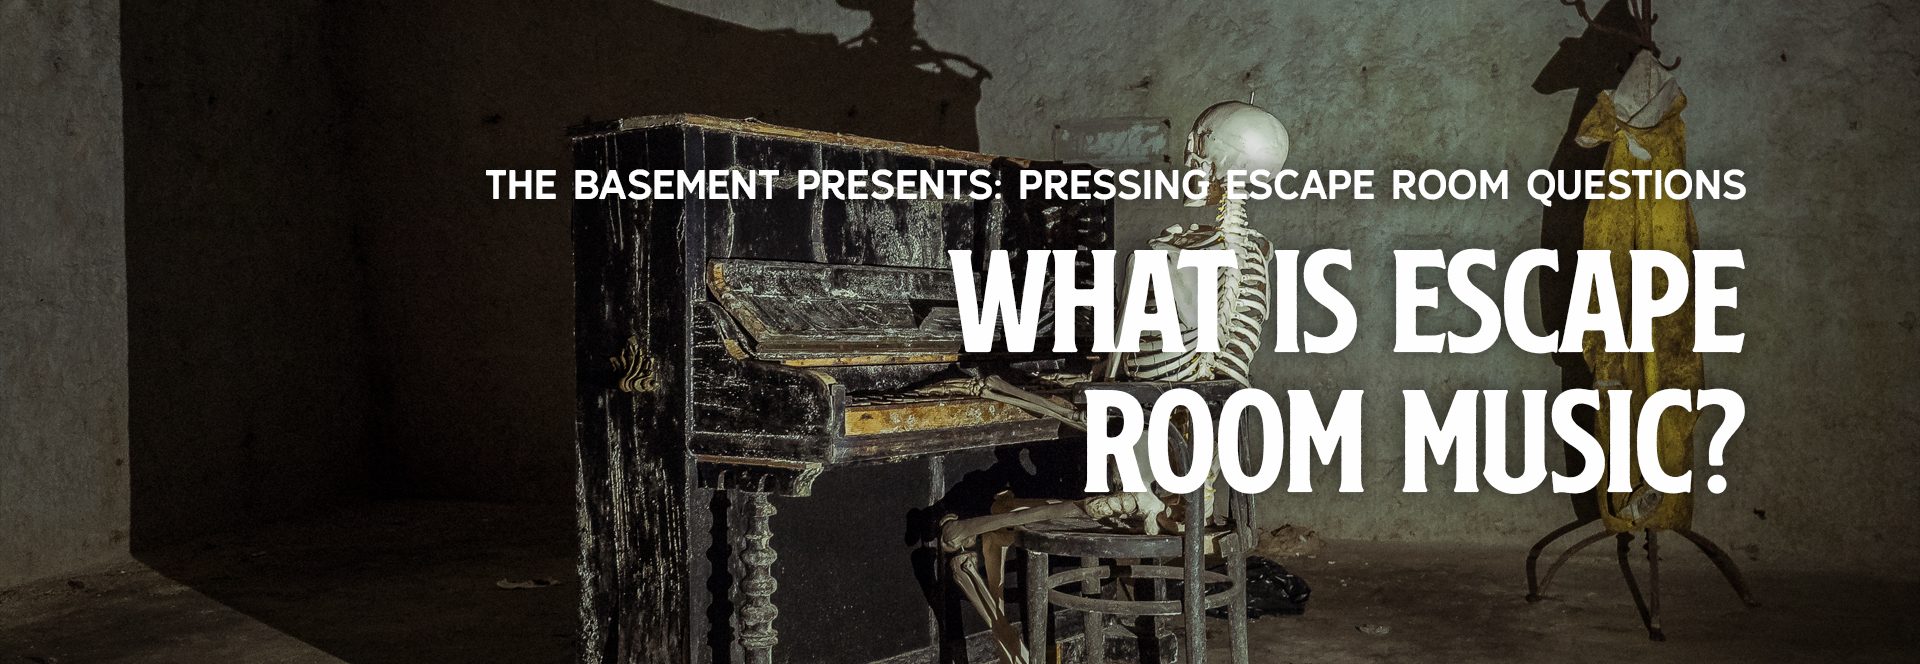 What Is Escape Room Music?